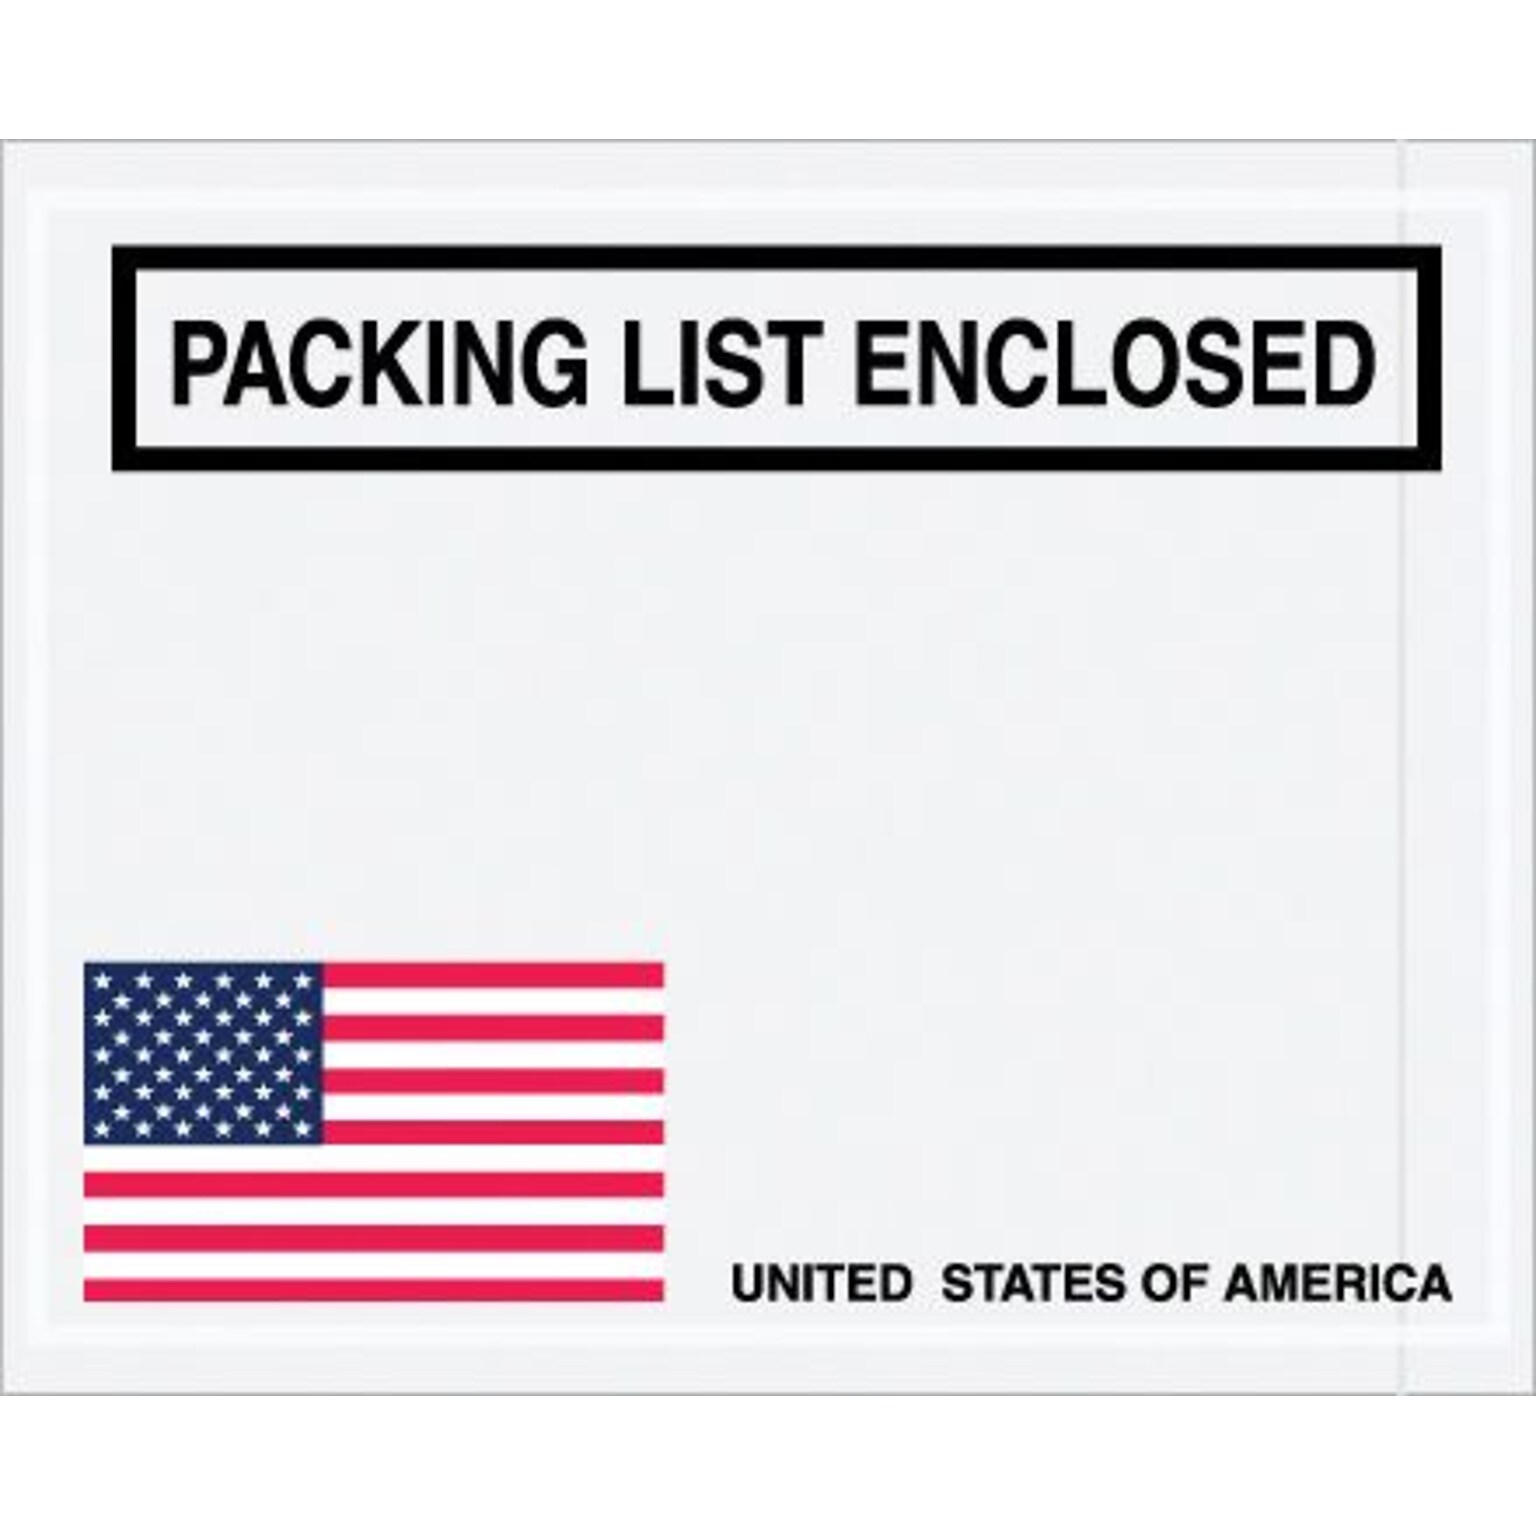 Quill Brand® Packing List Envelope, 4.5 x 5.5, U.S.A. Flag Panel Face, Packing List Enclosed, 1000/Case (PL465)